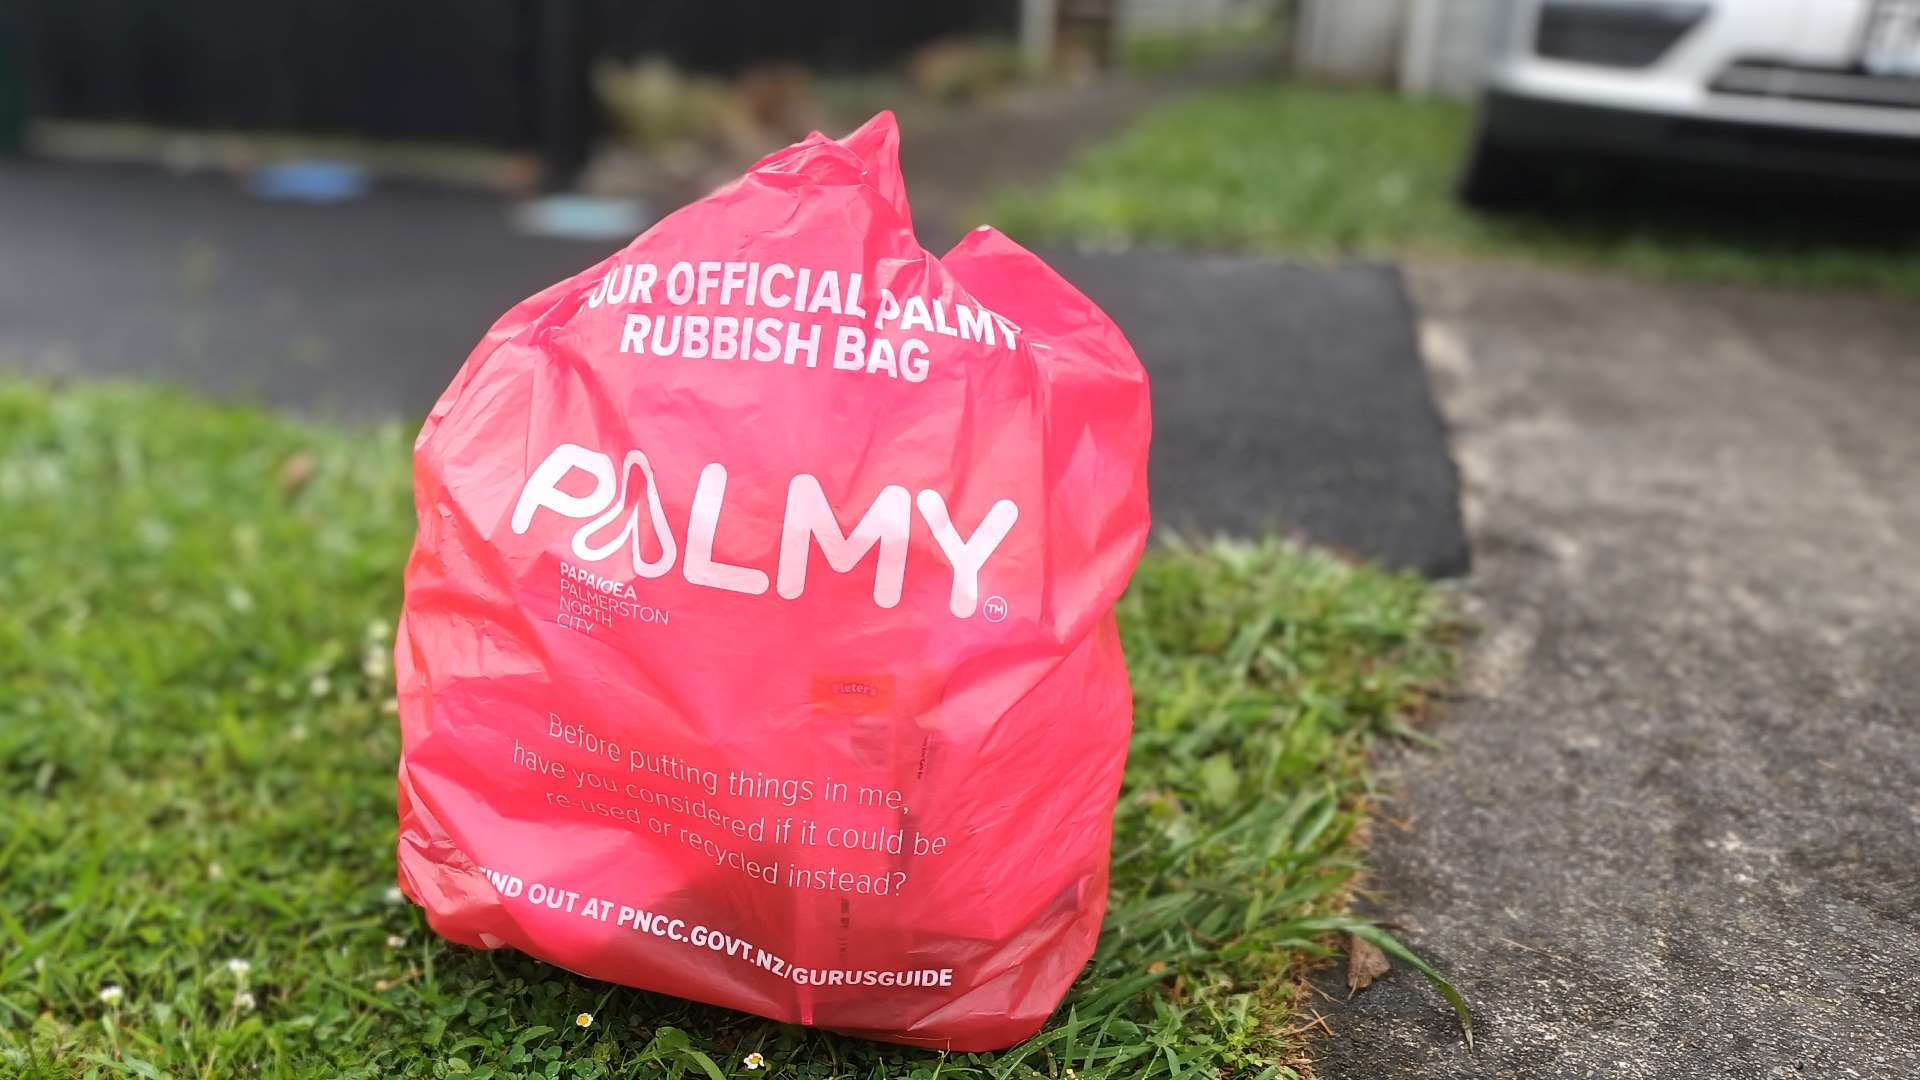 One of the new red rubbish bags out on the kerb for collection.